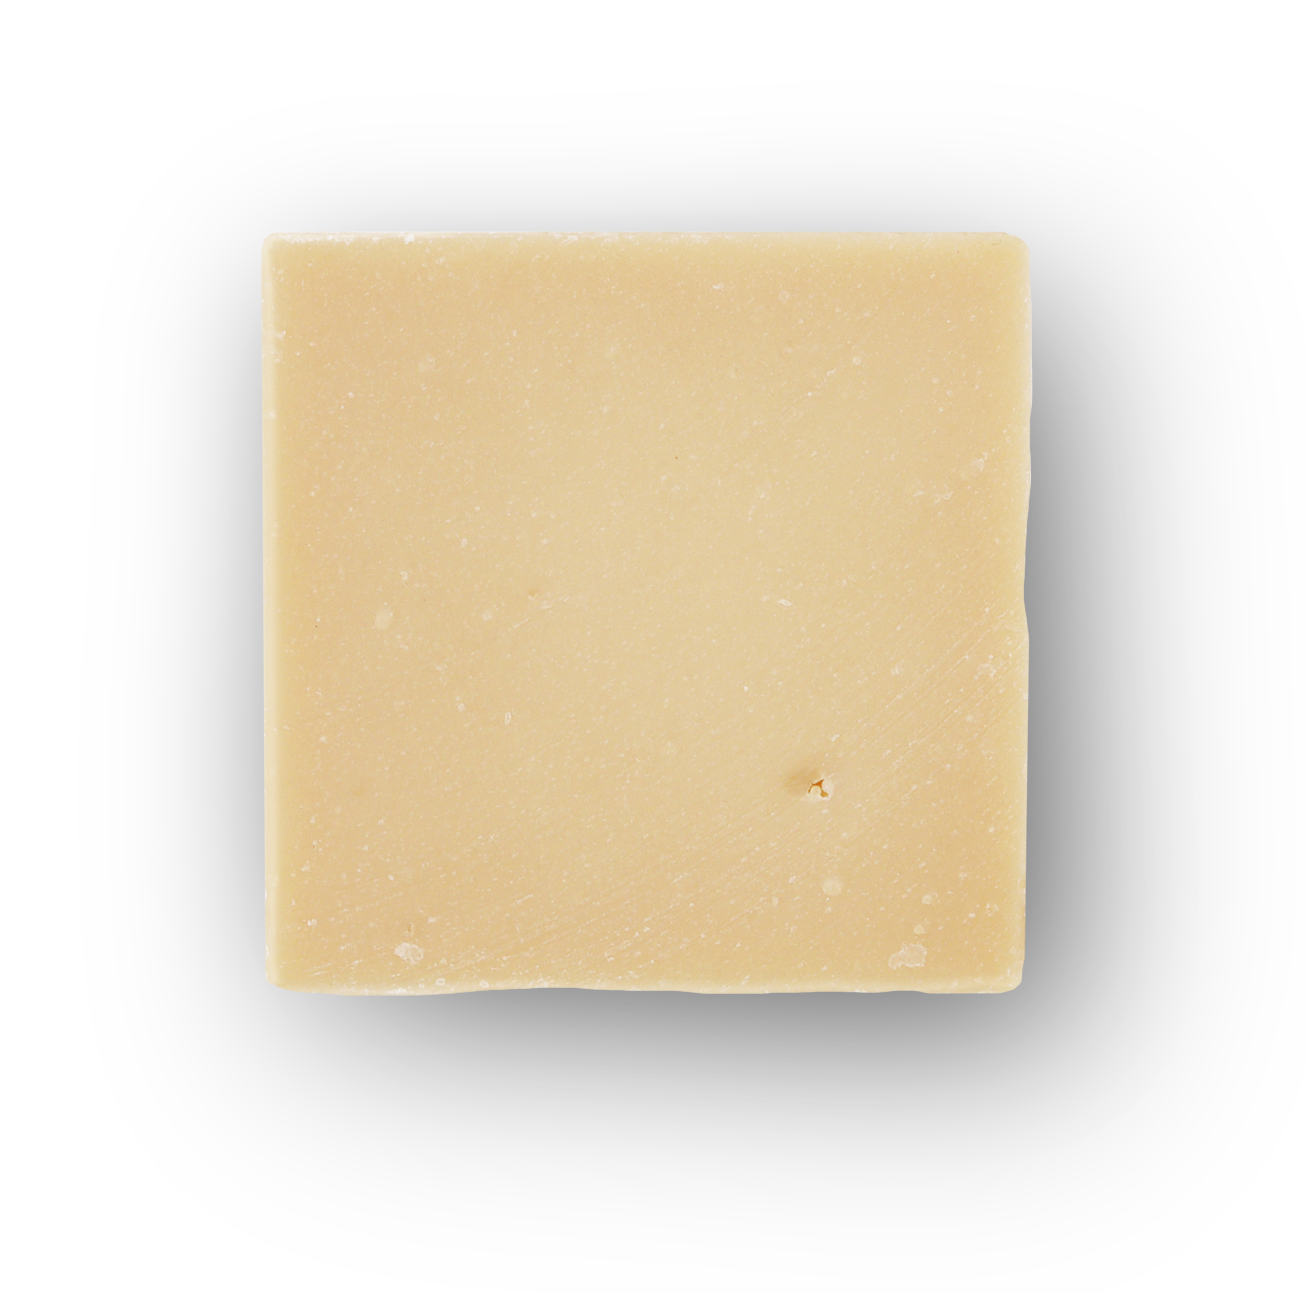 Dermal Defense natural soap with shea butter